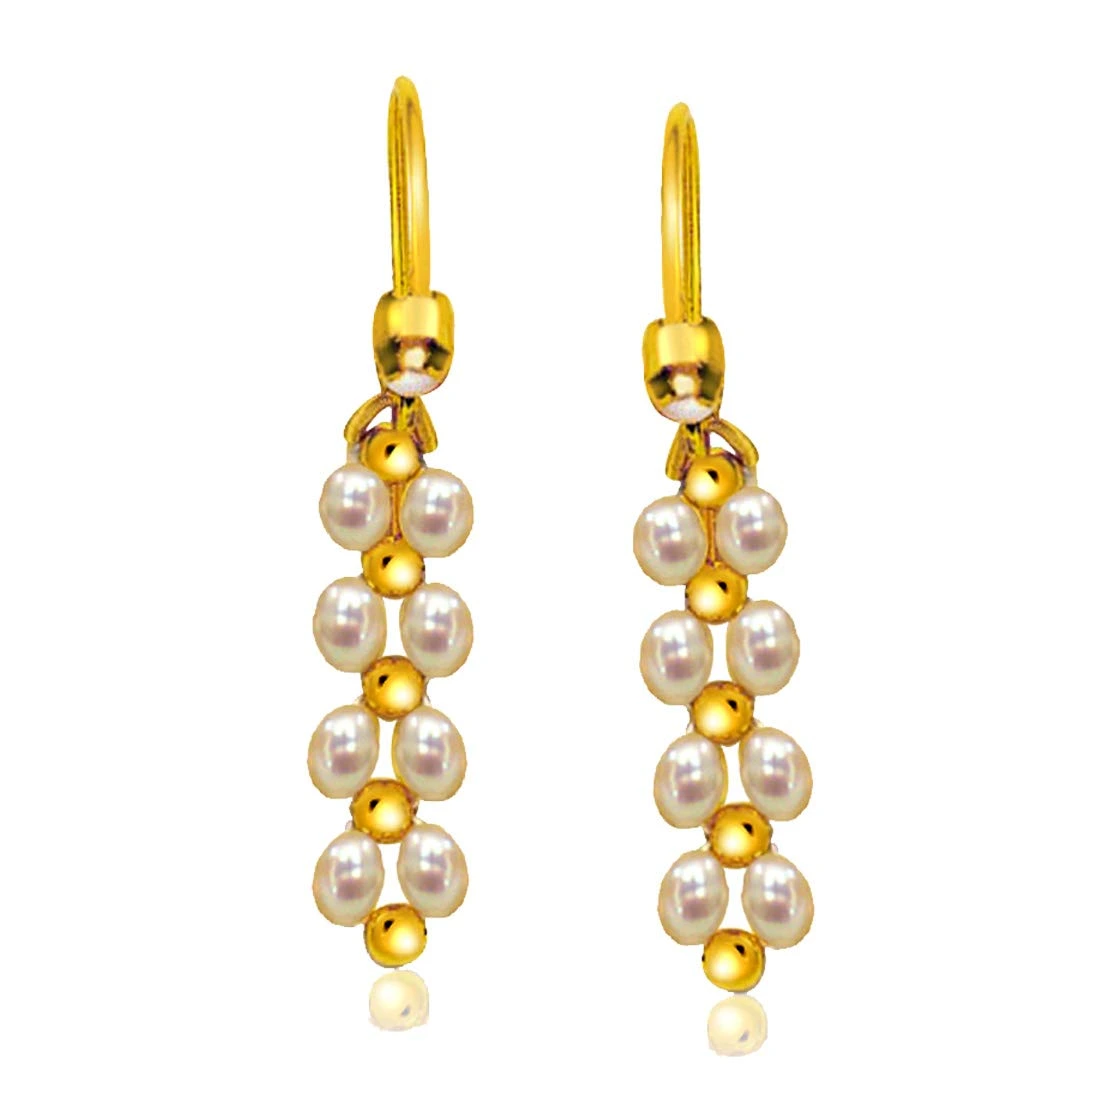 Glowing Gorgeous Danglers - Real Rice Pearl & Gold Plated Beads Hanging Earrings for Women (SE7)